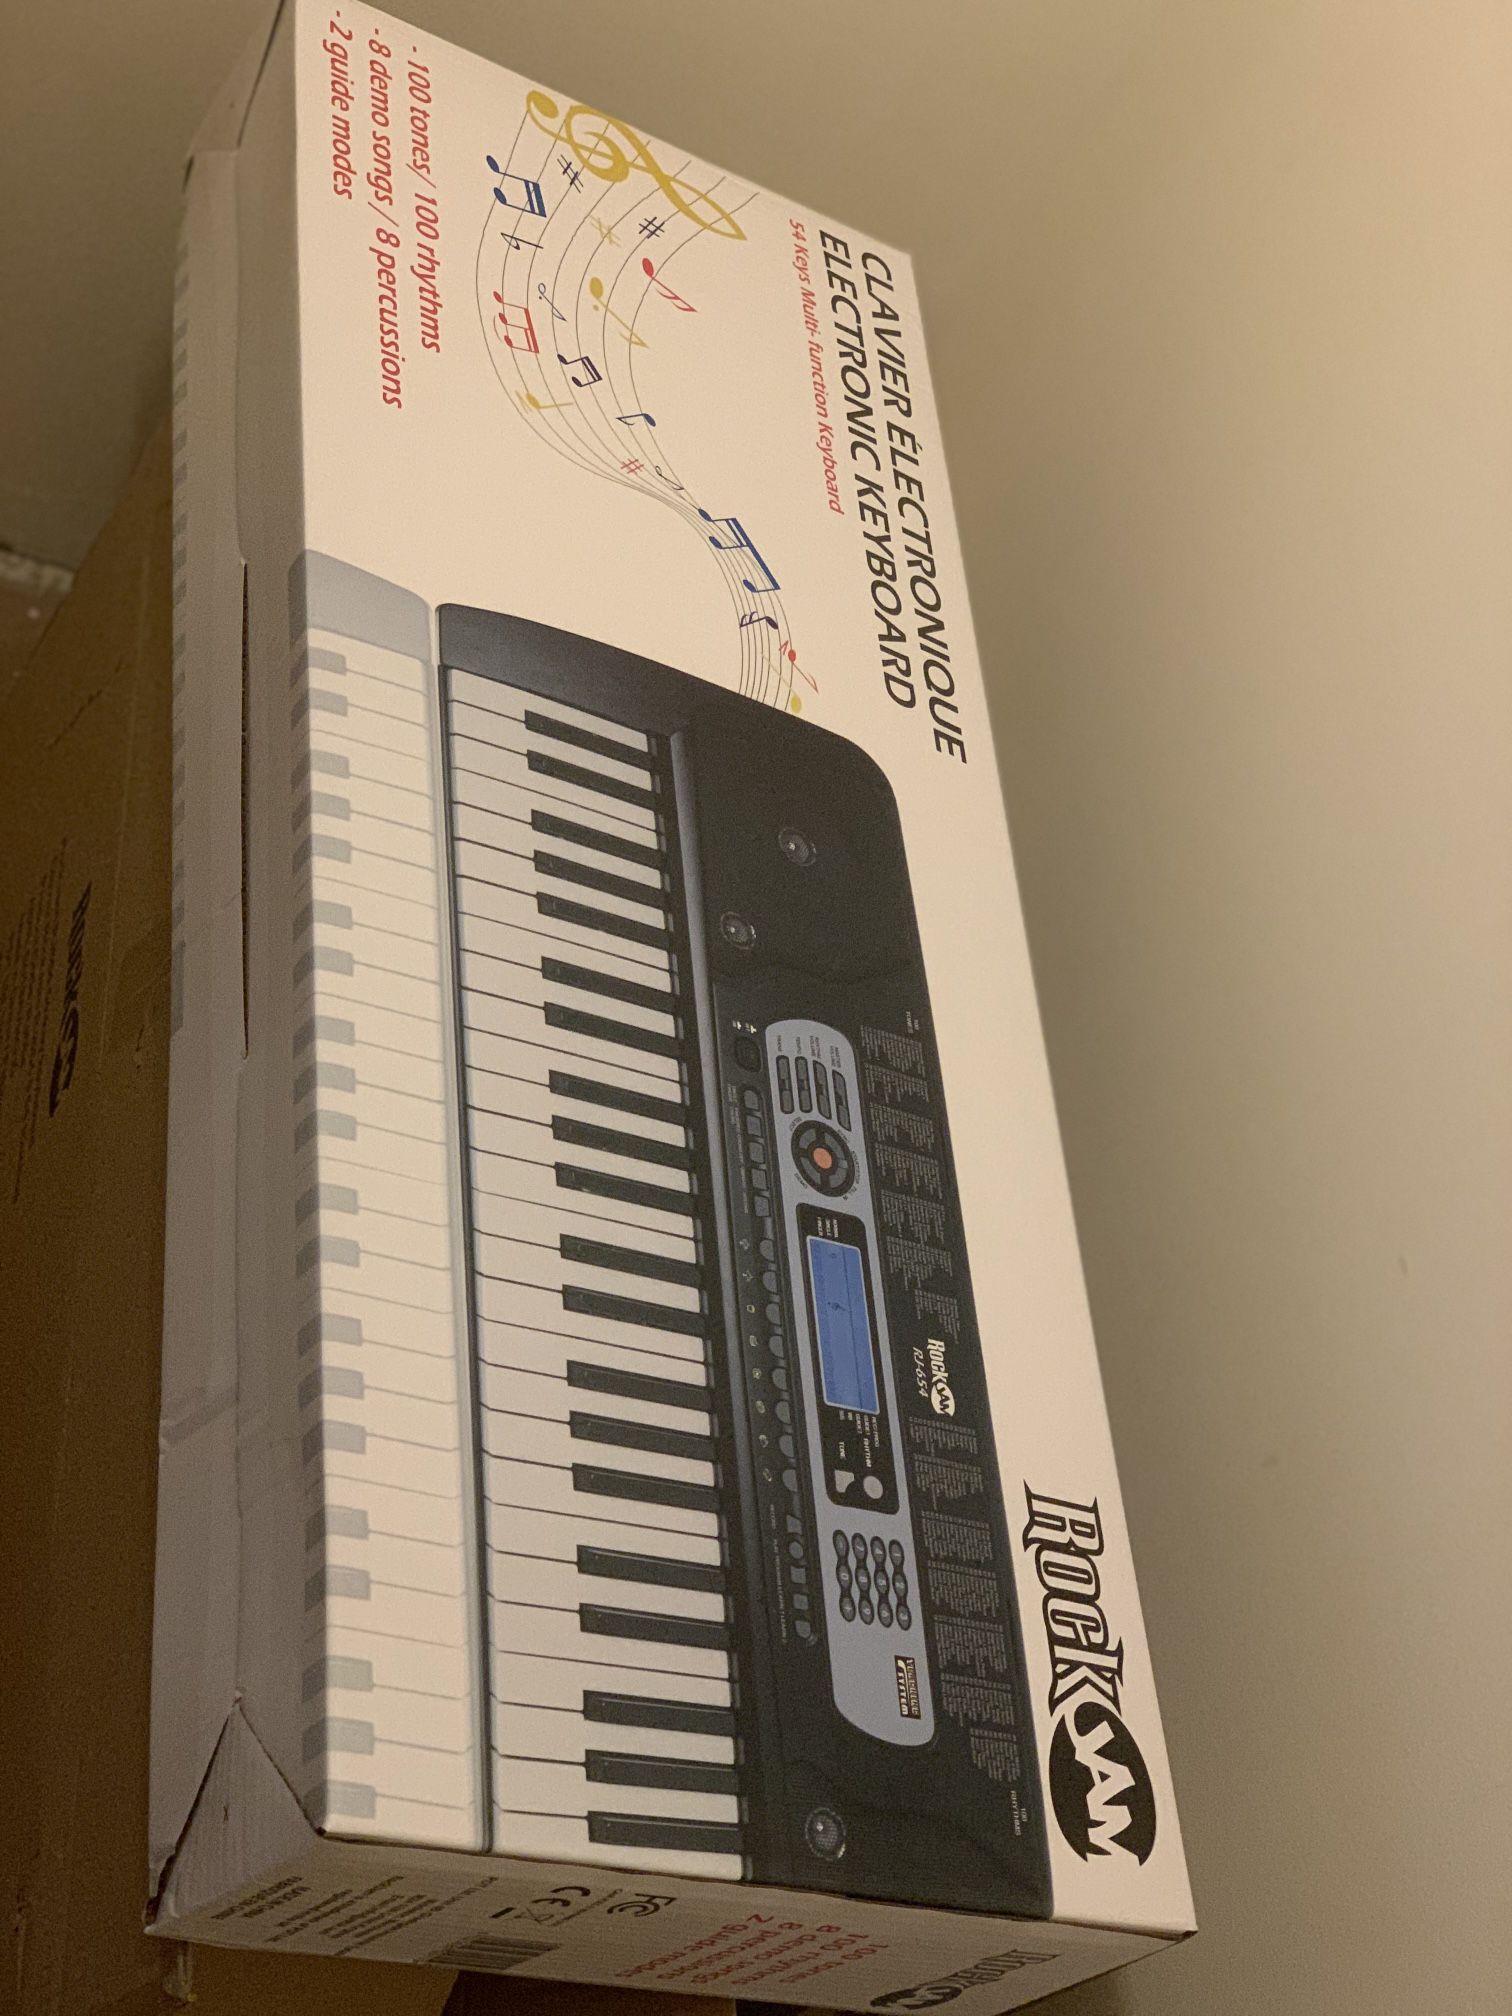 RockJam 54-Key Portable Electronic Keyboard with Interactive LCD Screen & Includes Piano Maestro Teaching App with 30 Songs